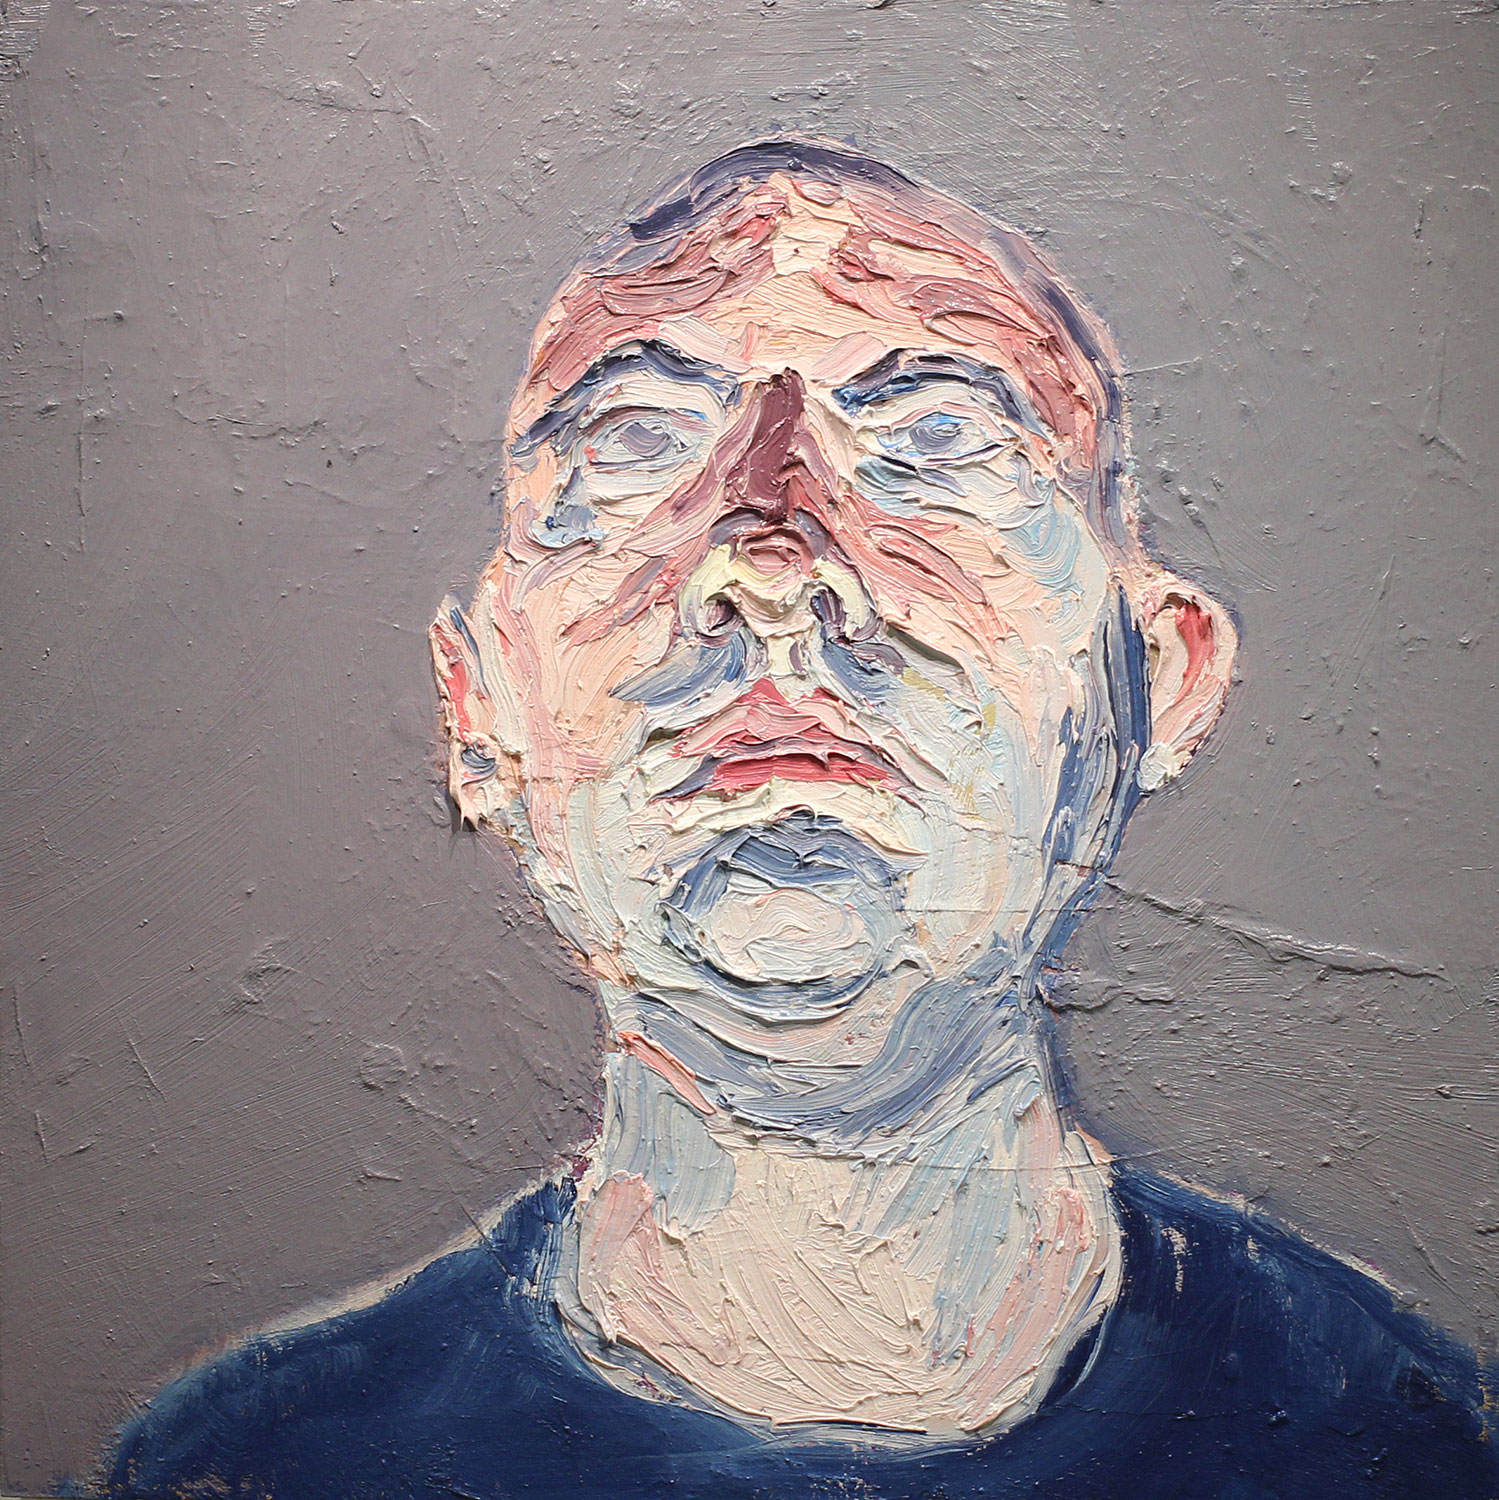 Thony Aiuppy, Image Bearer, 2013. Oil on wood, 30 x 30 in.